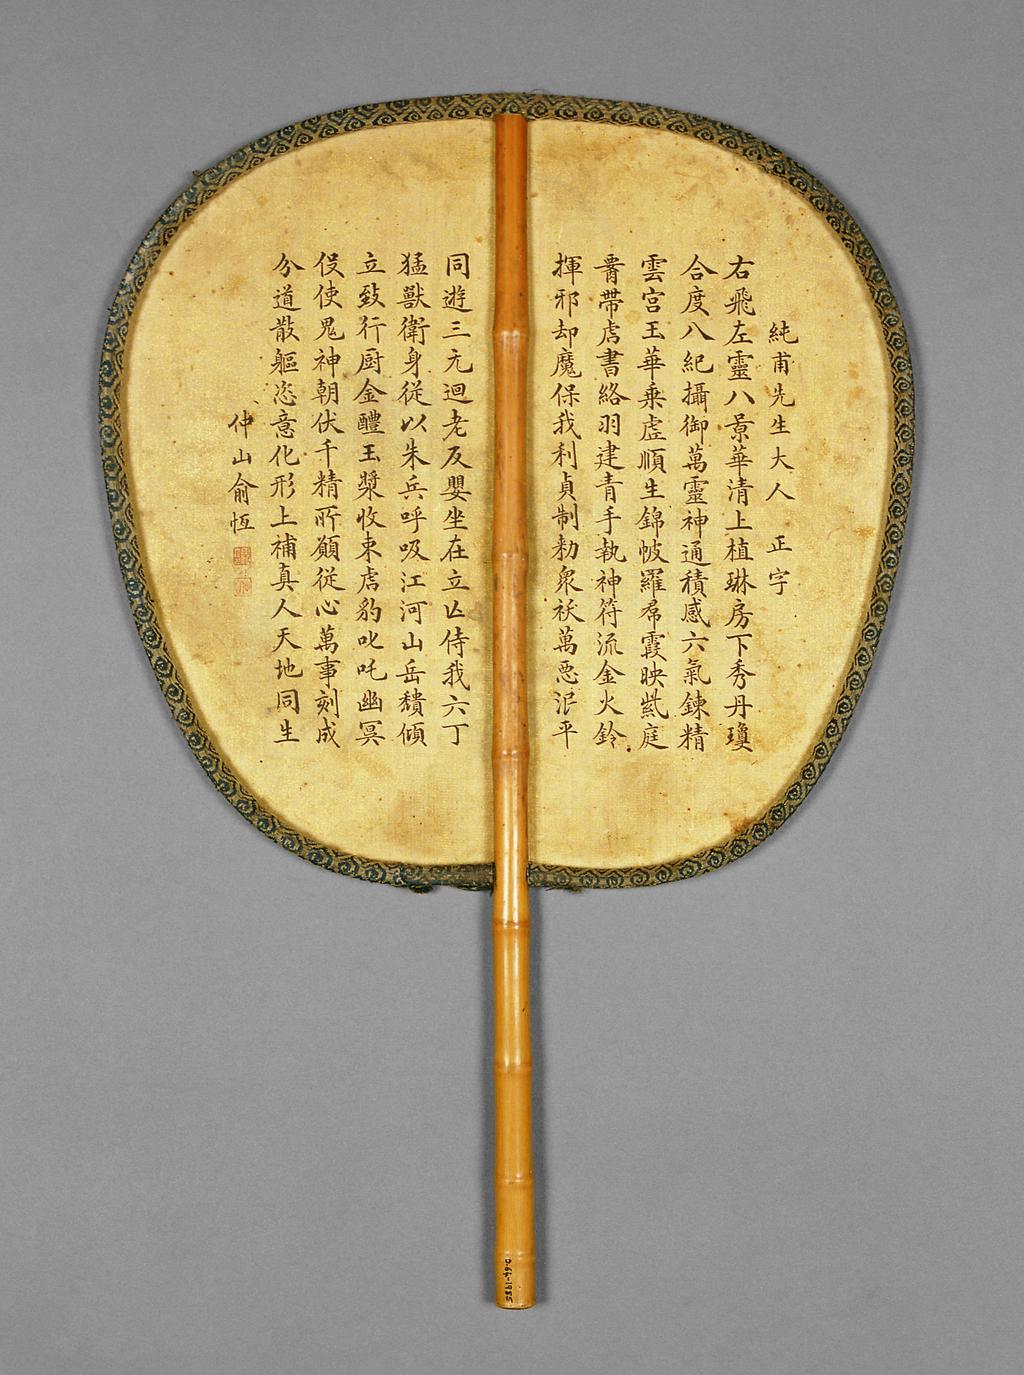 An image of Screen fan. Unknown maker. Decorated with quail and orchid, the reverse with a colophon. Inscribed with a dedication to Shunweng laoshou daren, date: gengchen (i.e. either 1820 or 1760) and signed un-deciphered. Stick: plain bamboo. Rim: brocade covered. Face: painted in translucent watercolours and inscribed in Chinese ink on silk; reverse: inscribed in Chinese ink on gold spattered silk. Height, guards, 39.5 cm, width, 26.7 cm, after 1770 to before 1830. Messel-Rosse Collection.